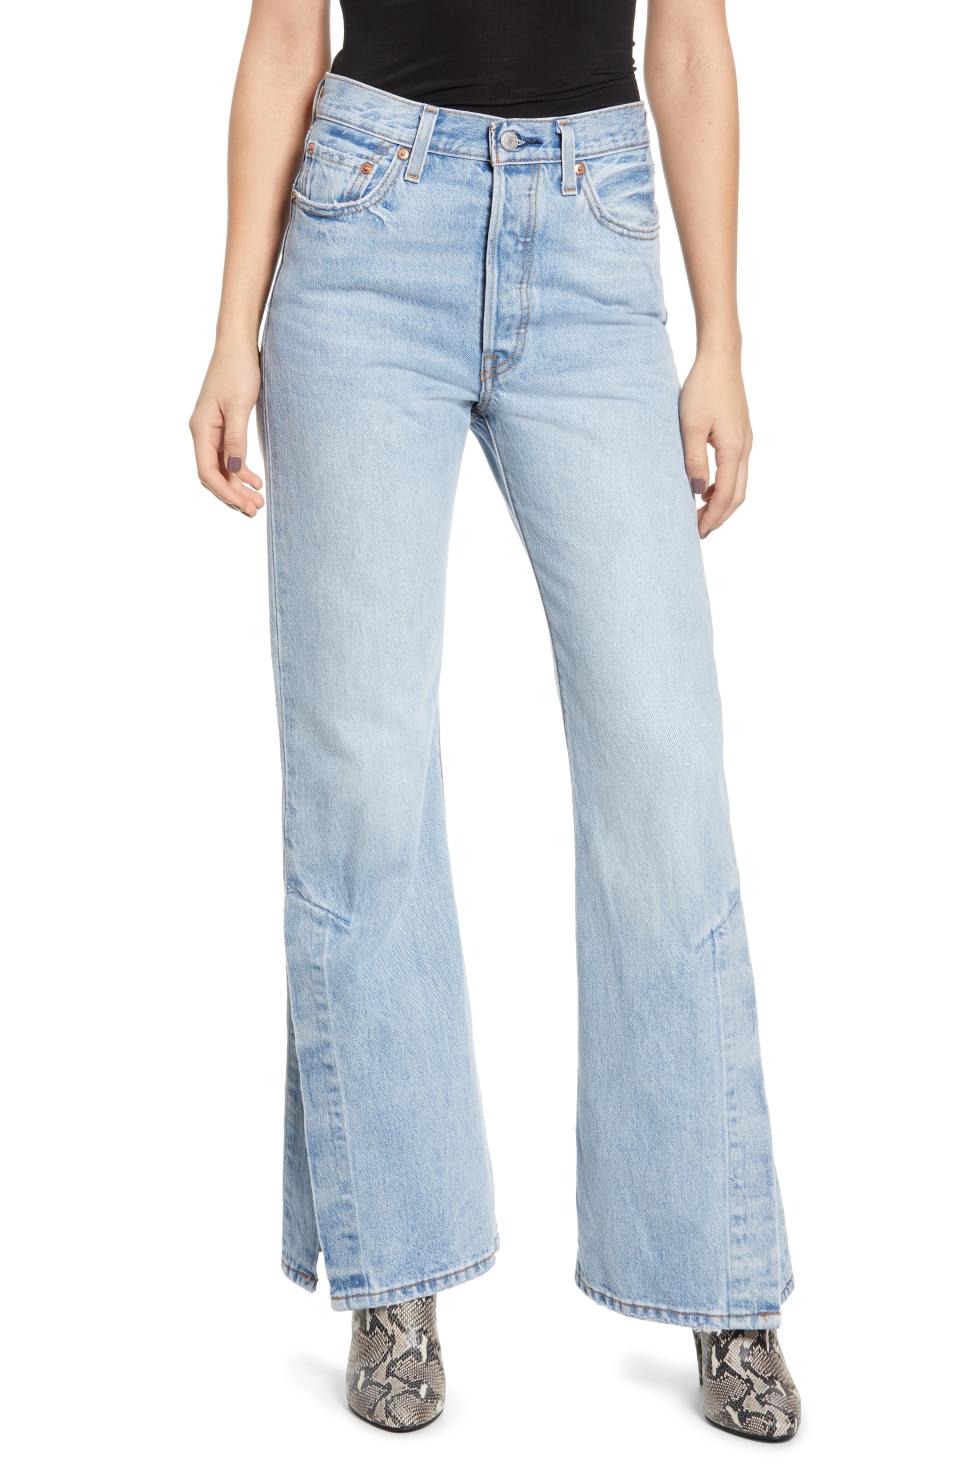 21) A Pair of Retro-Looking Boot-Cut Jeans